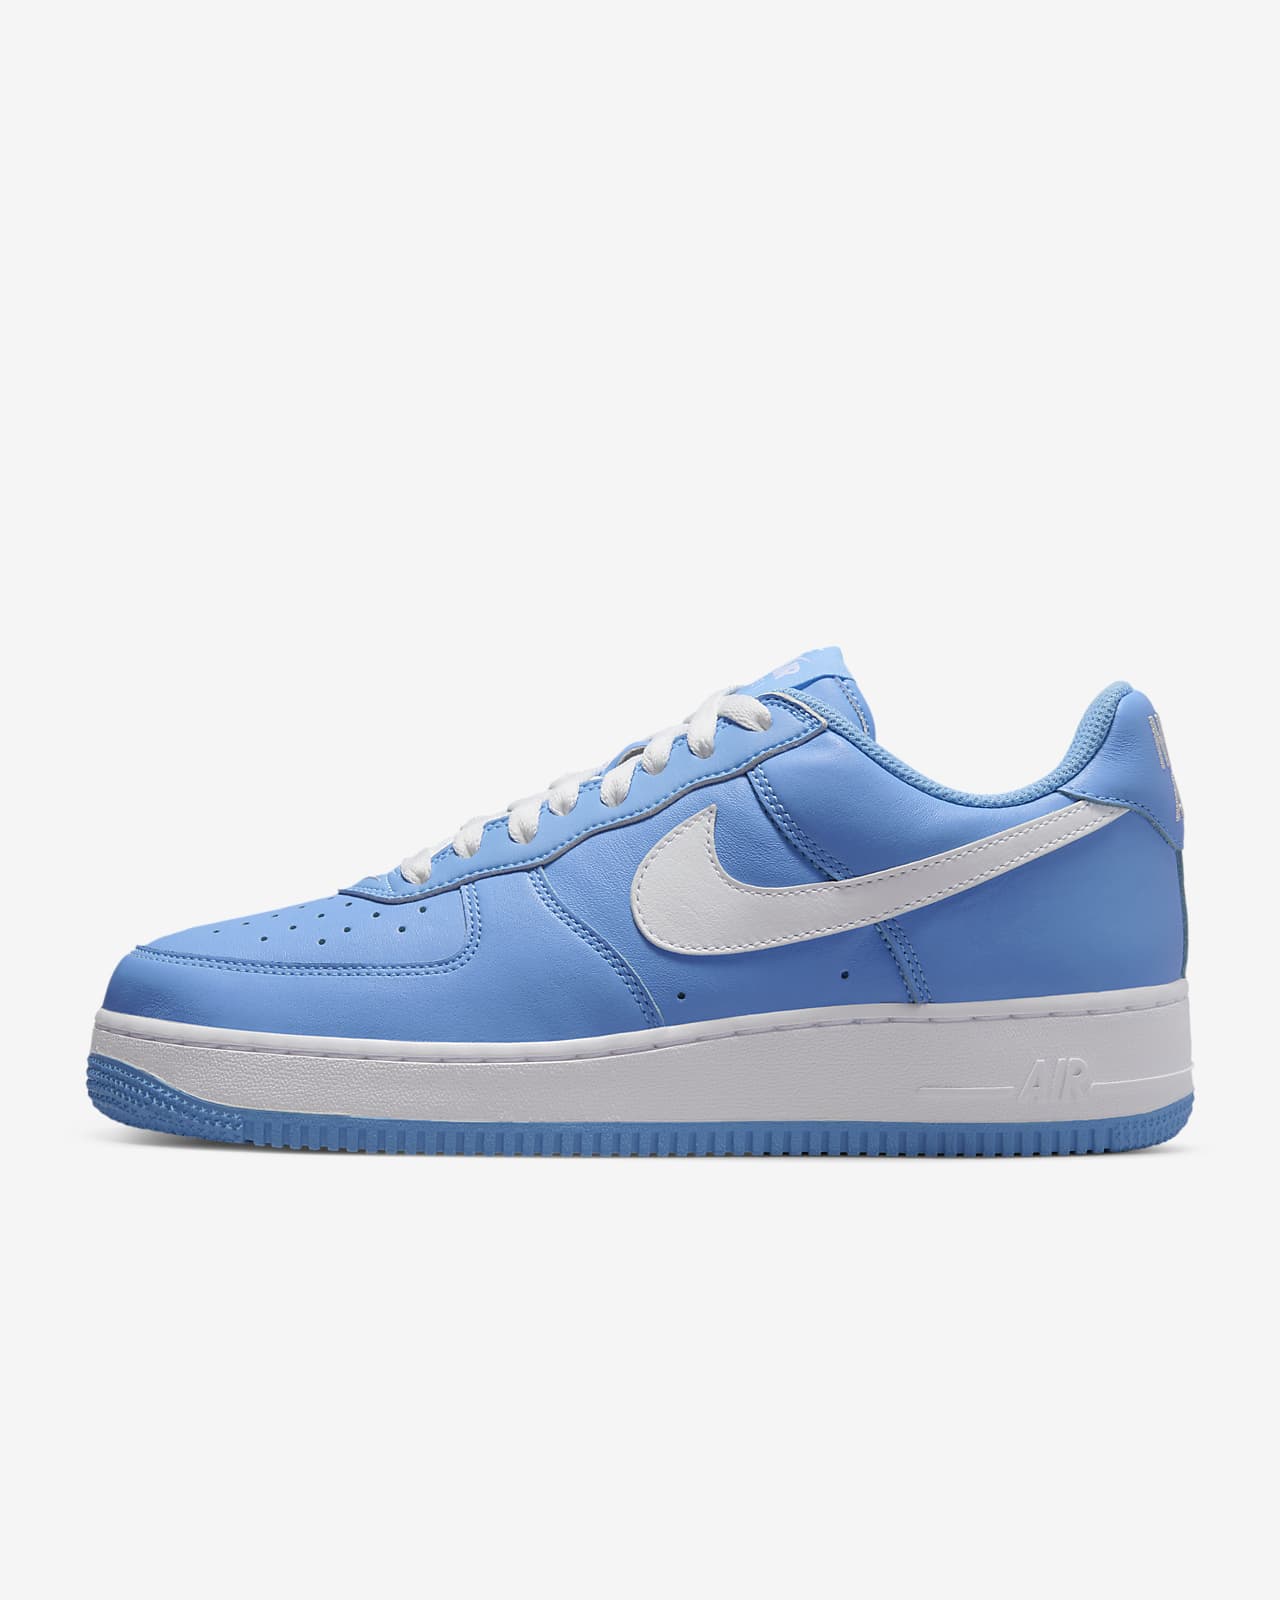 Nike Force 1 Low Retro Shoes.